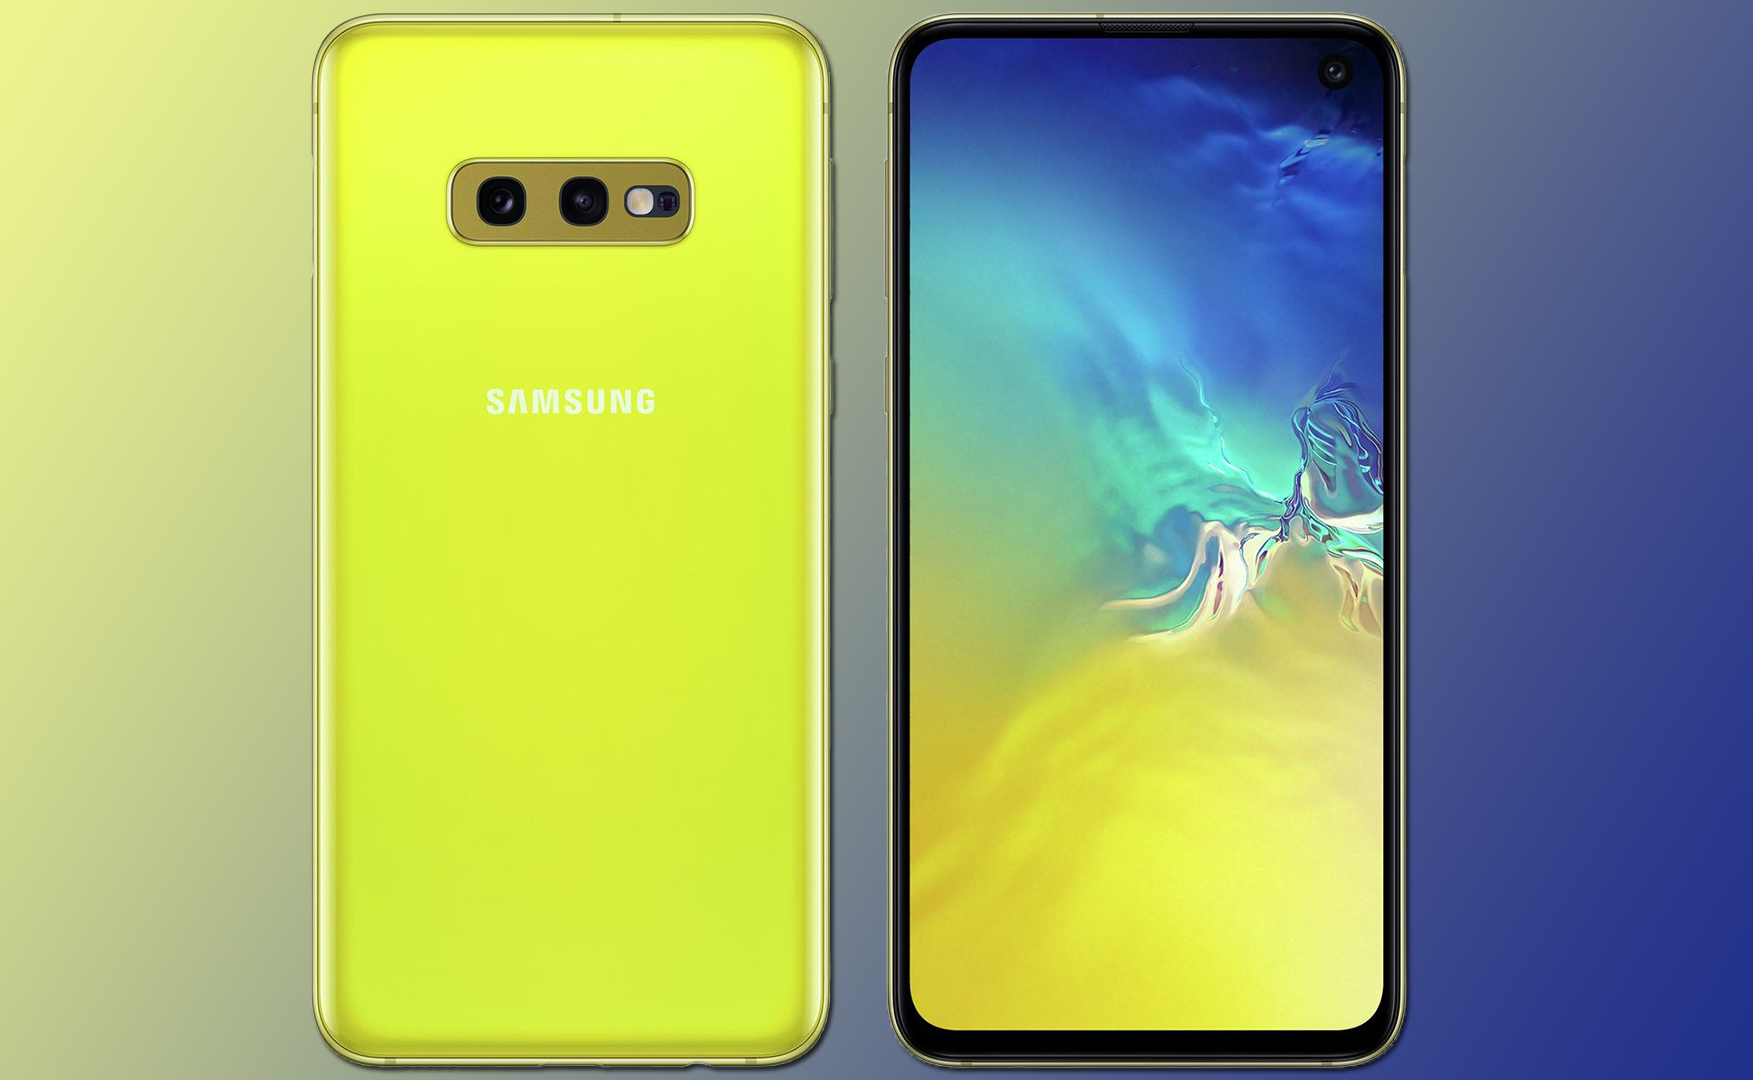 We now know Samsung Galaxy S10 Lite's India release date